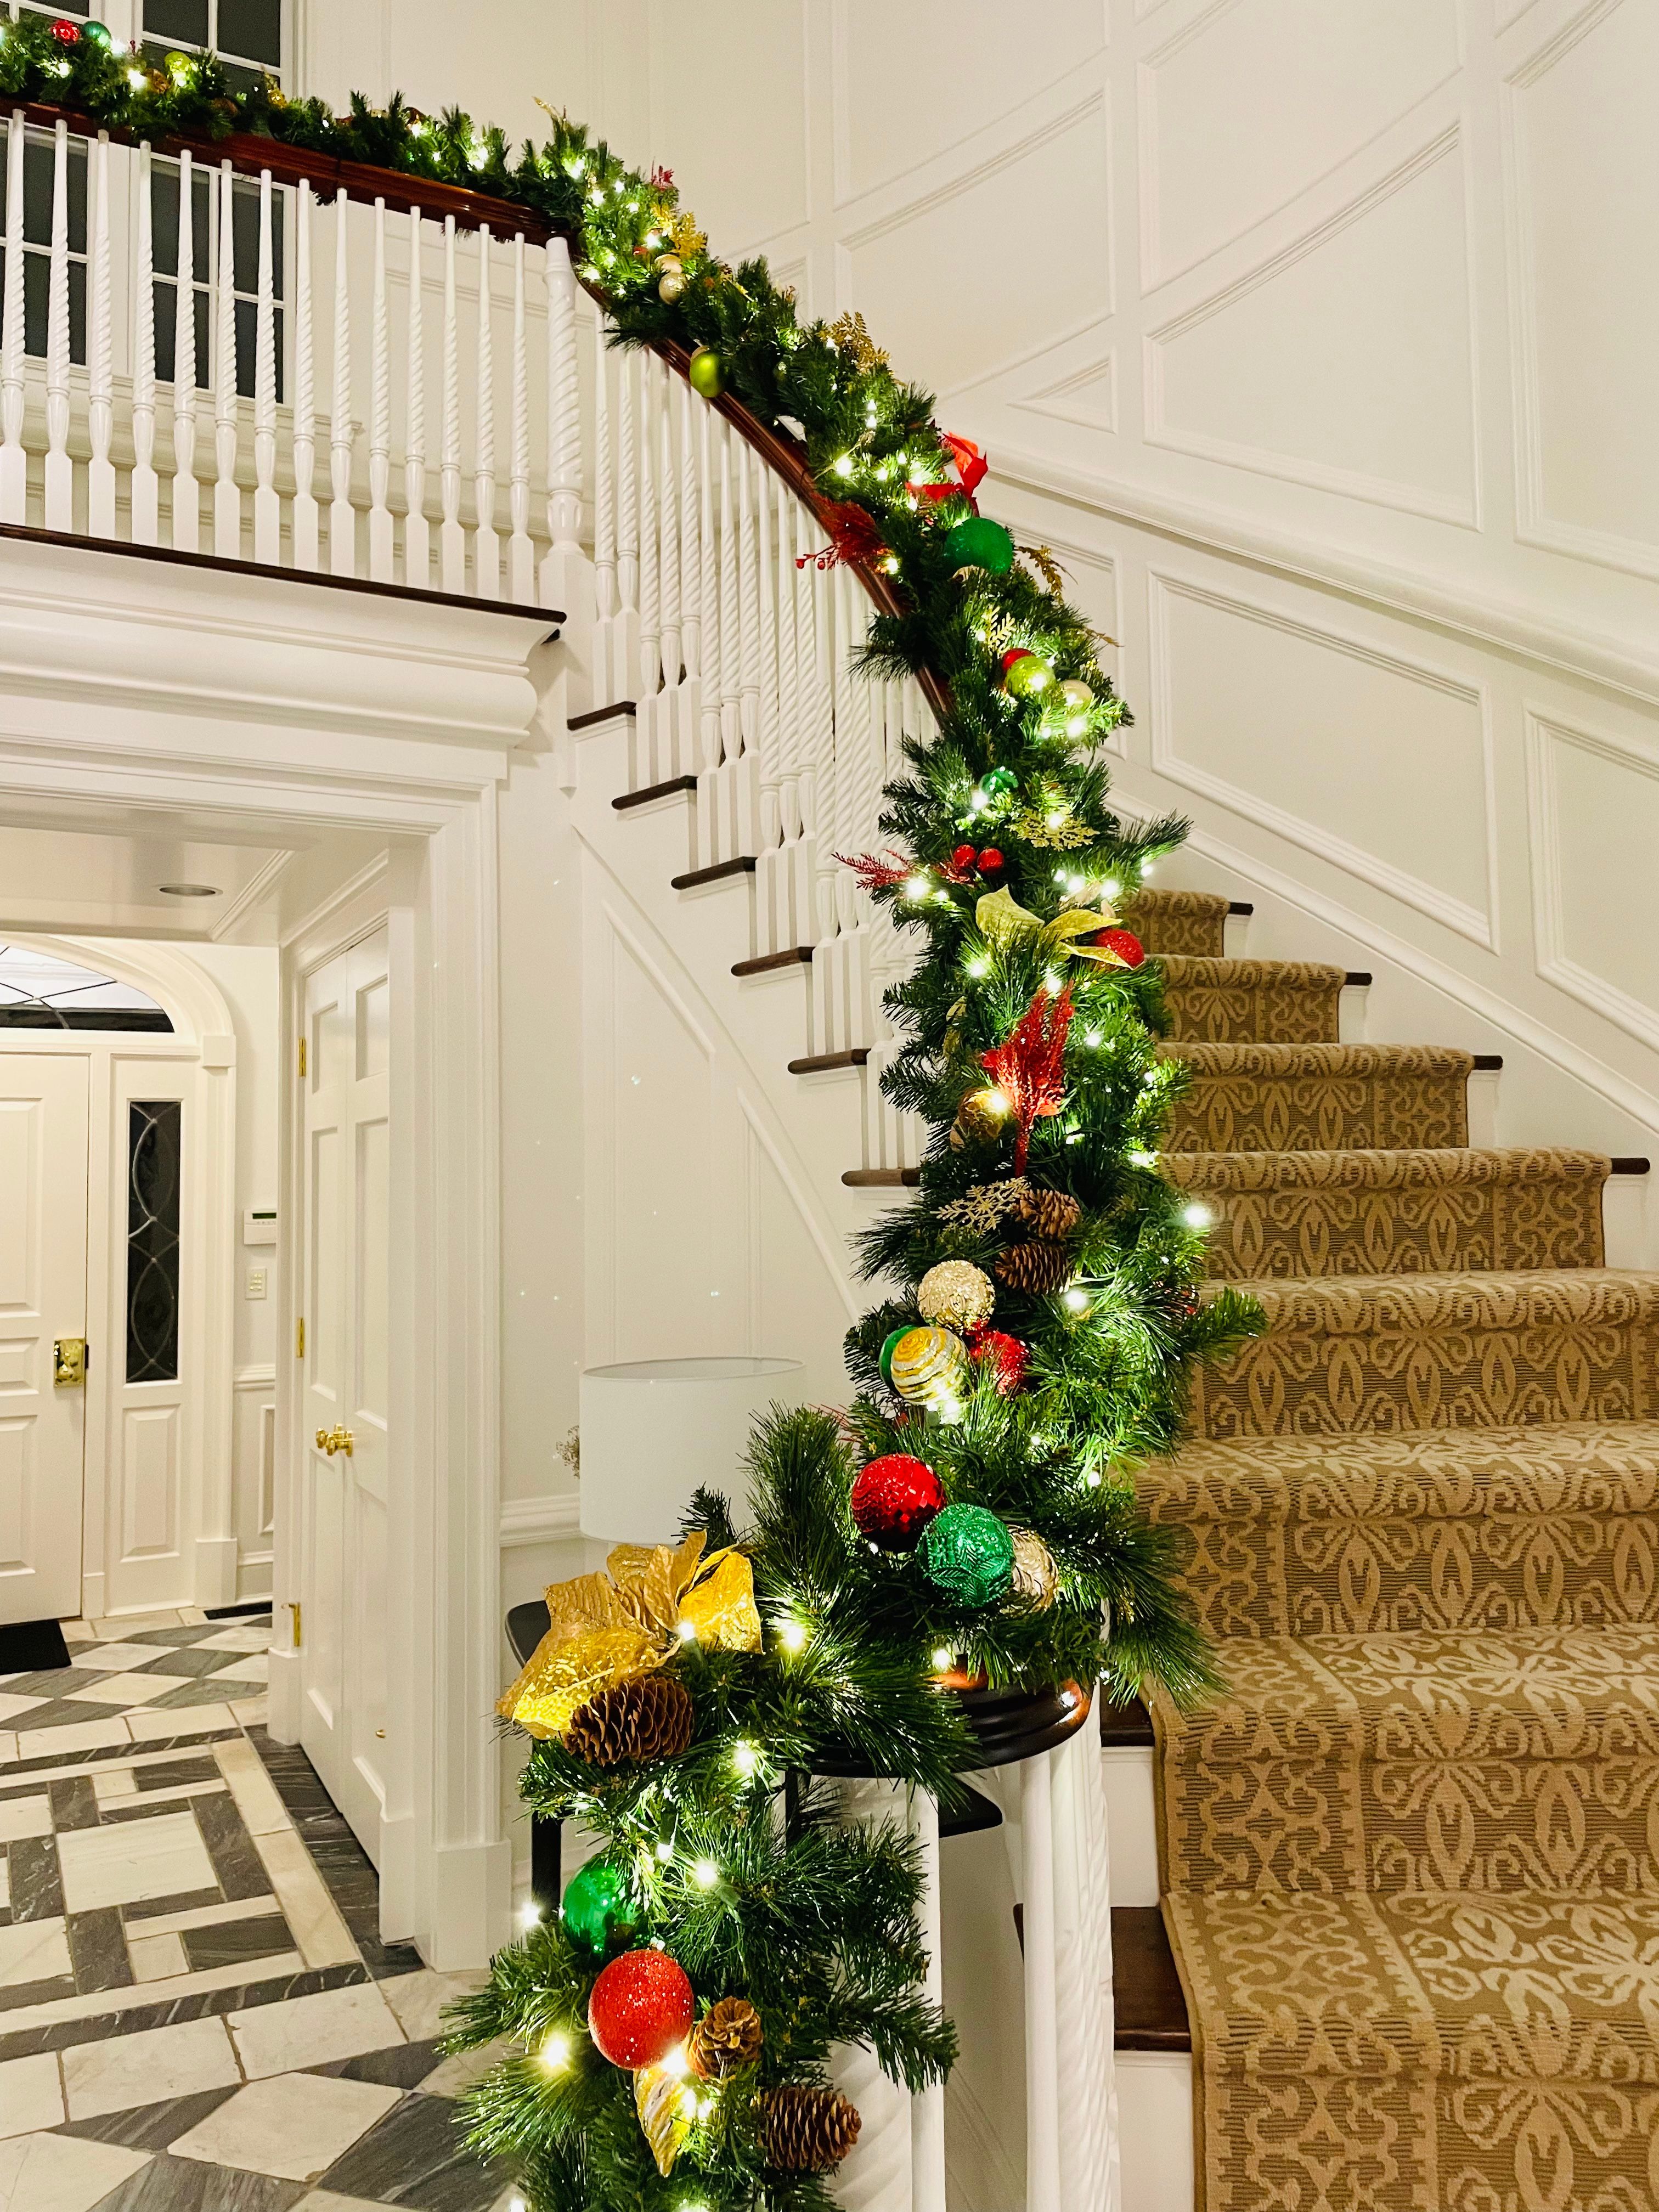 Decorated Christmas garland on staircase